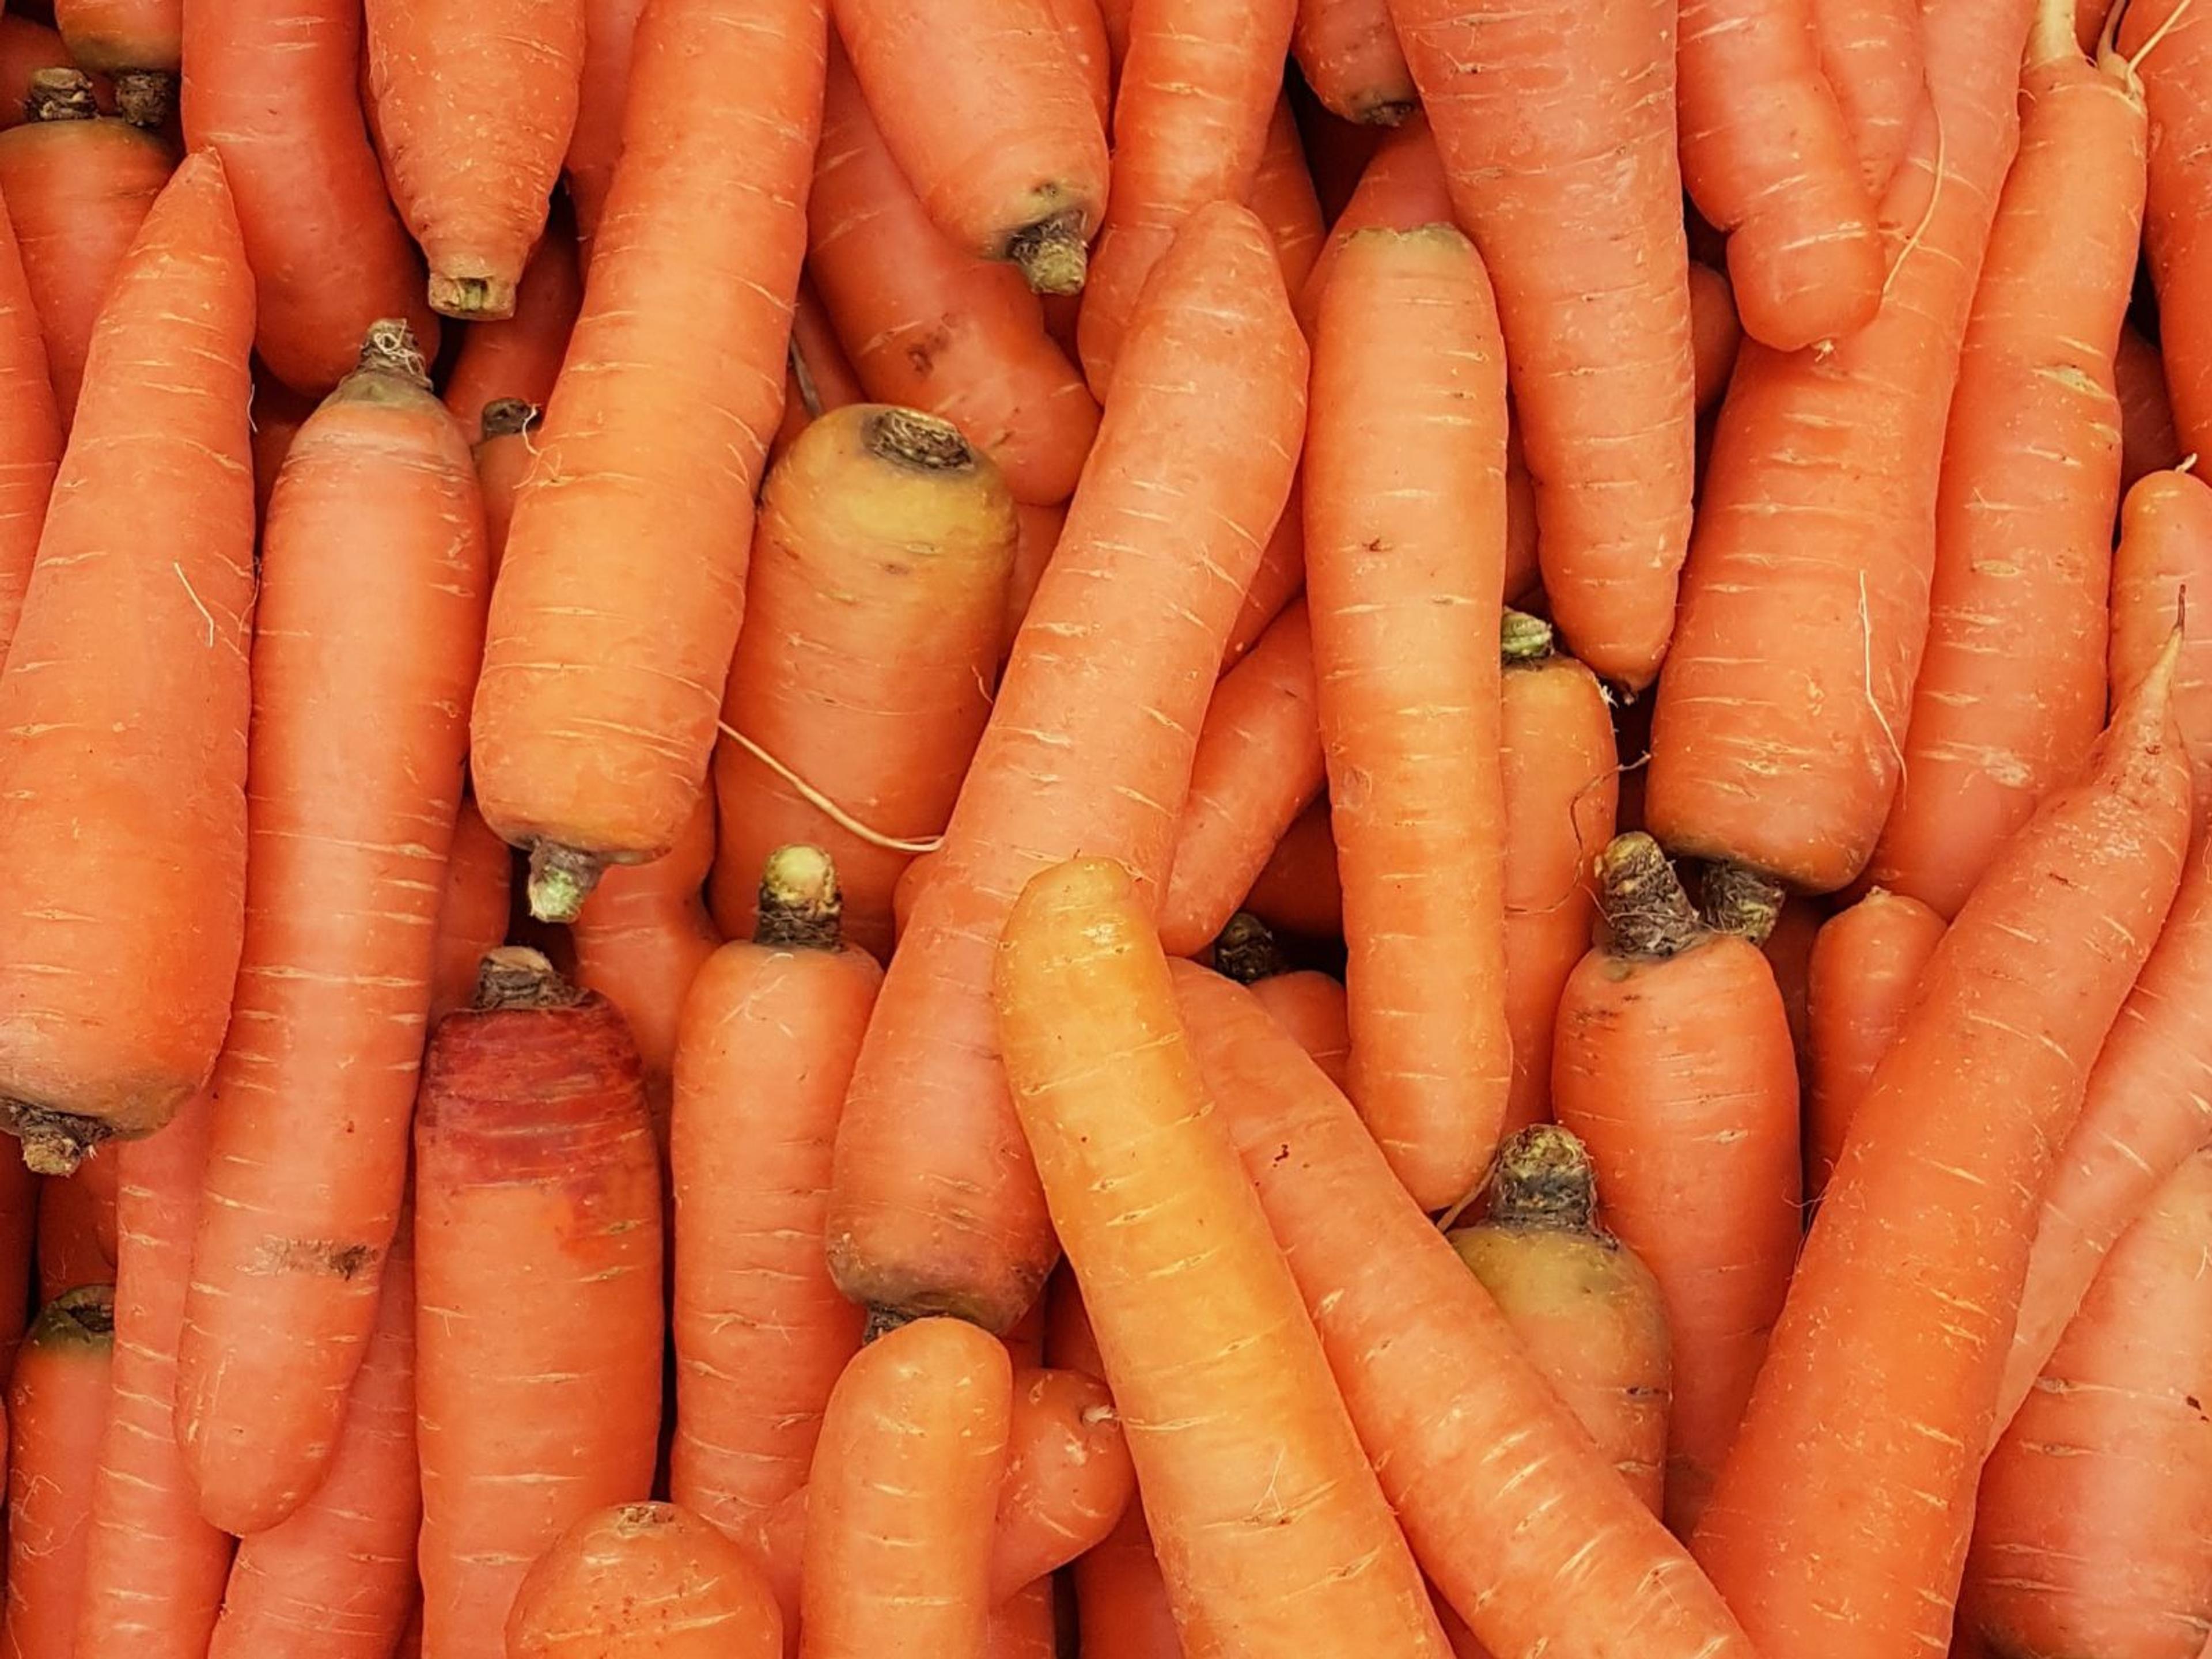 A pile of carrots.